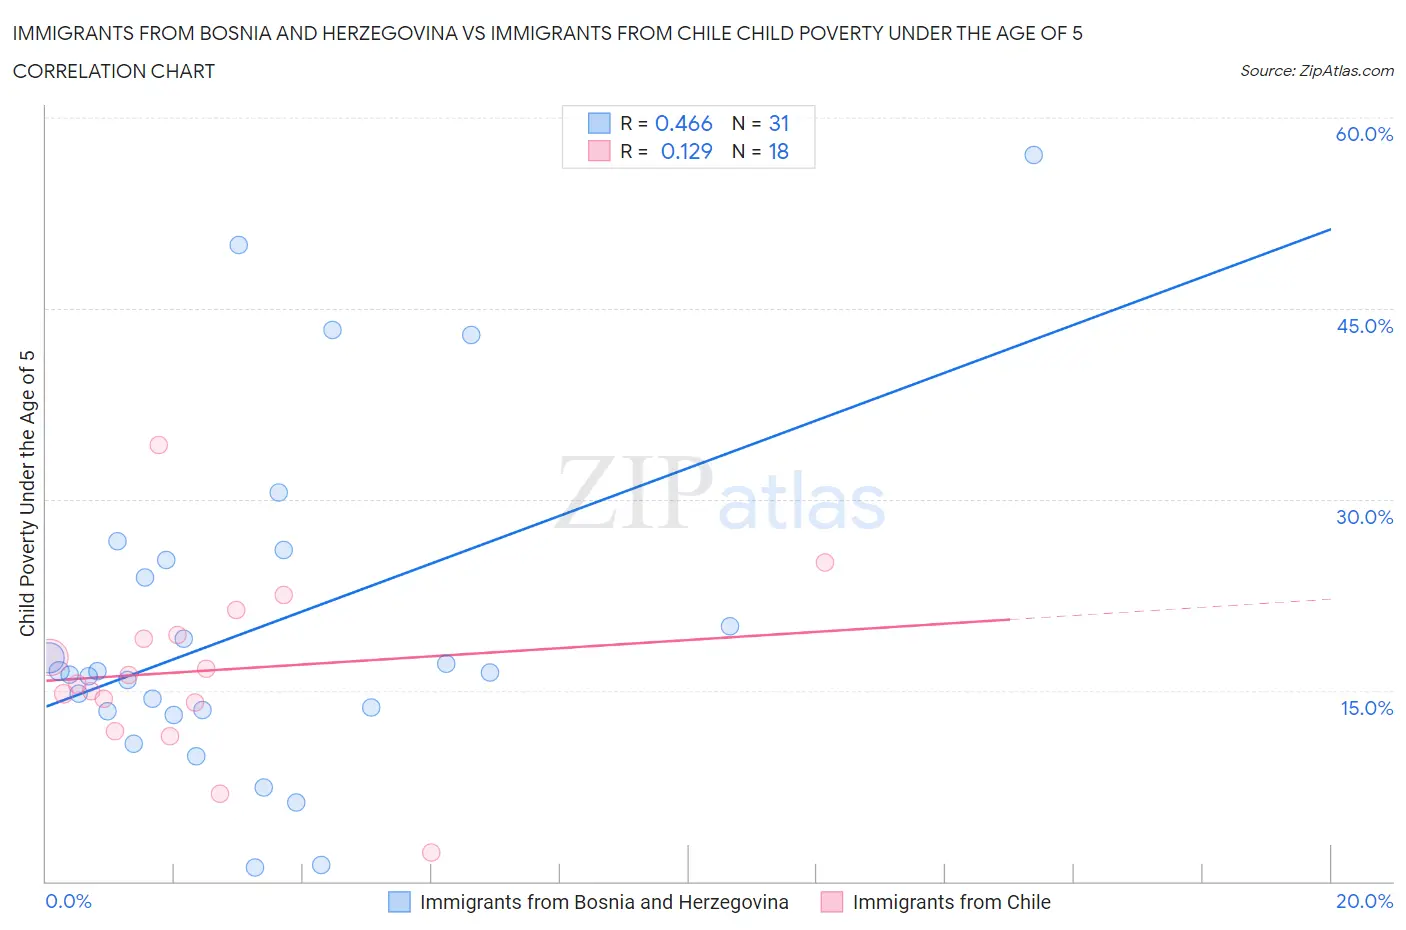 Immigrants from Bosnia and Herzegovina vs Immigrants from Chile Child Poverty Under the Age of 5